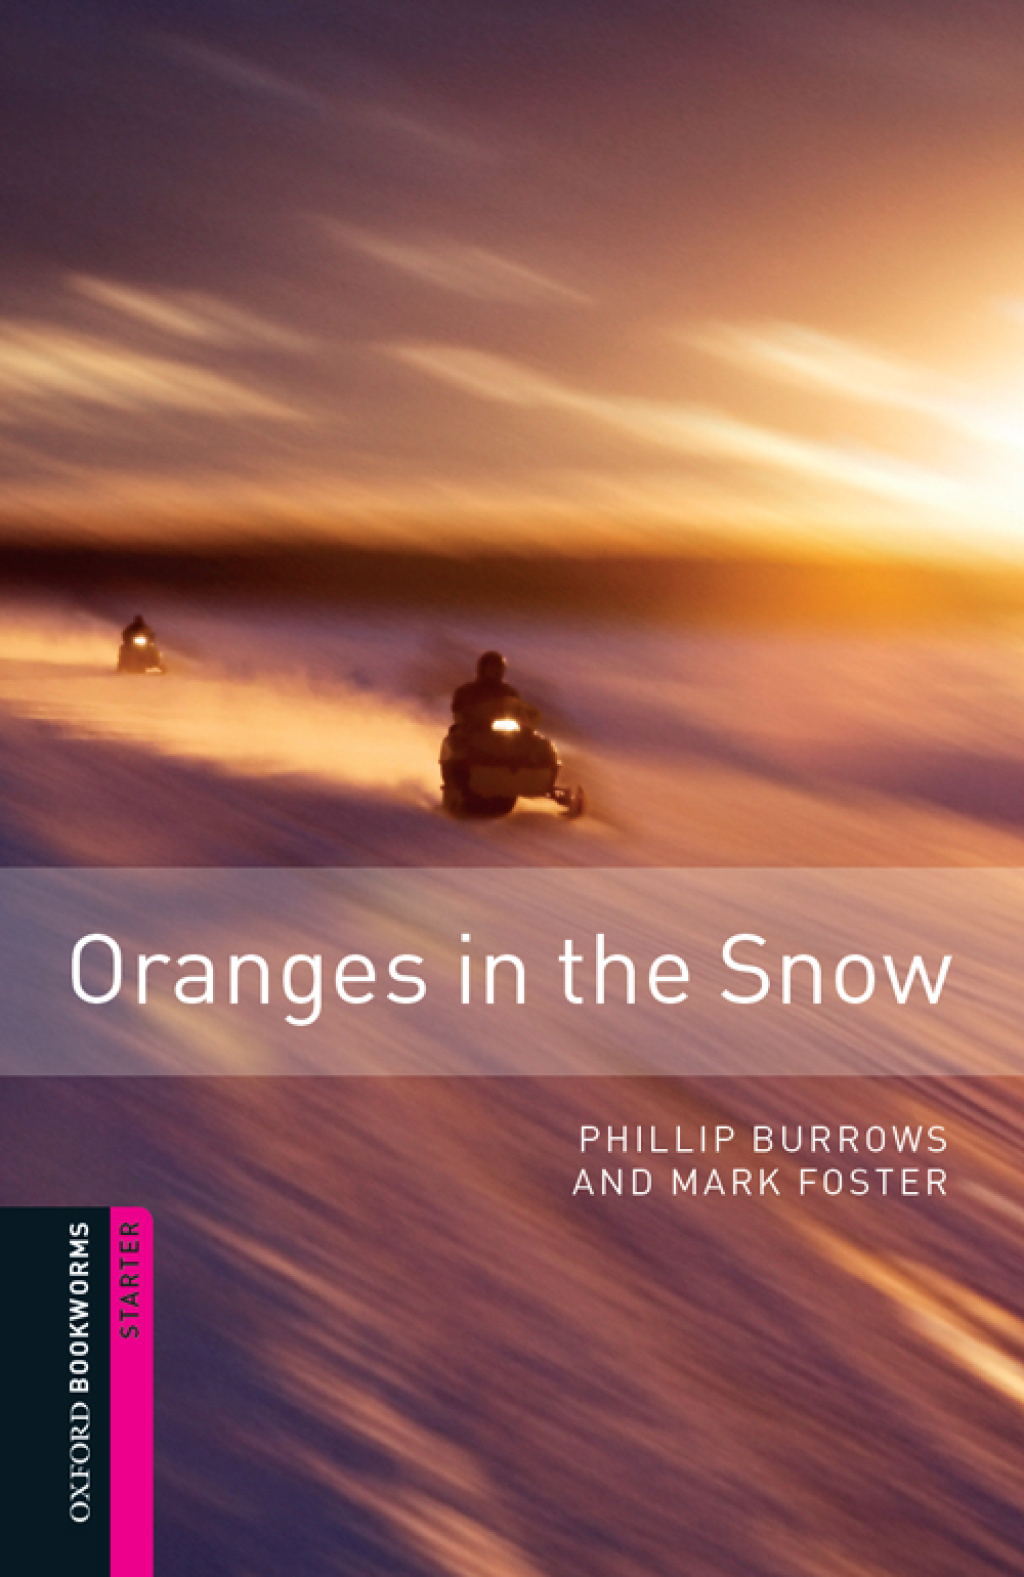 Oranges in the Snow Starter Level Oxford Bookworms Library - 3rd Edition (eBook Rental)